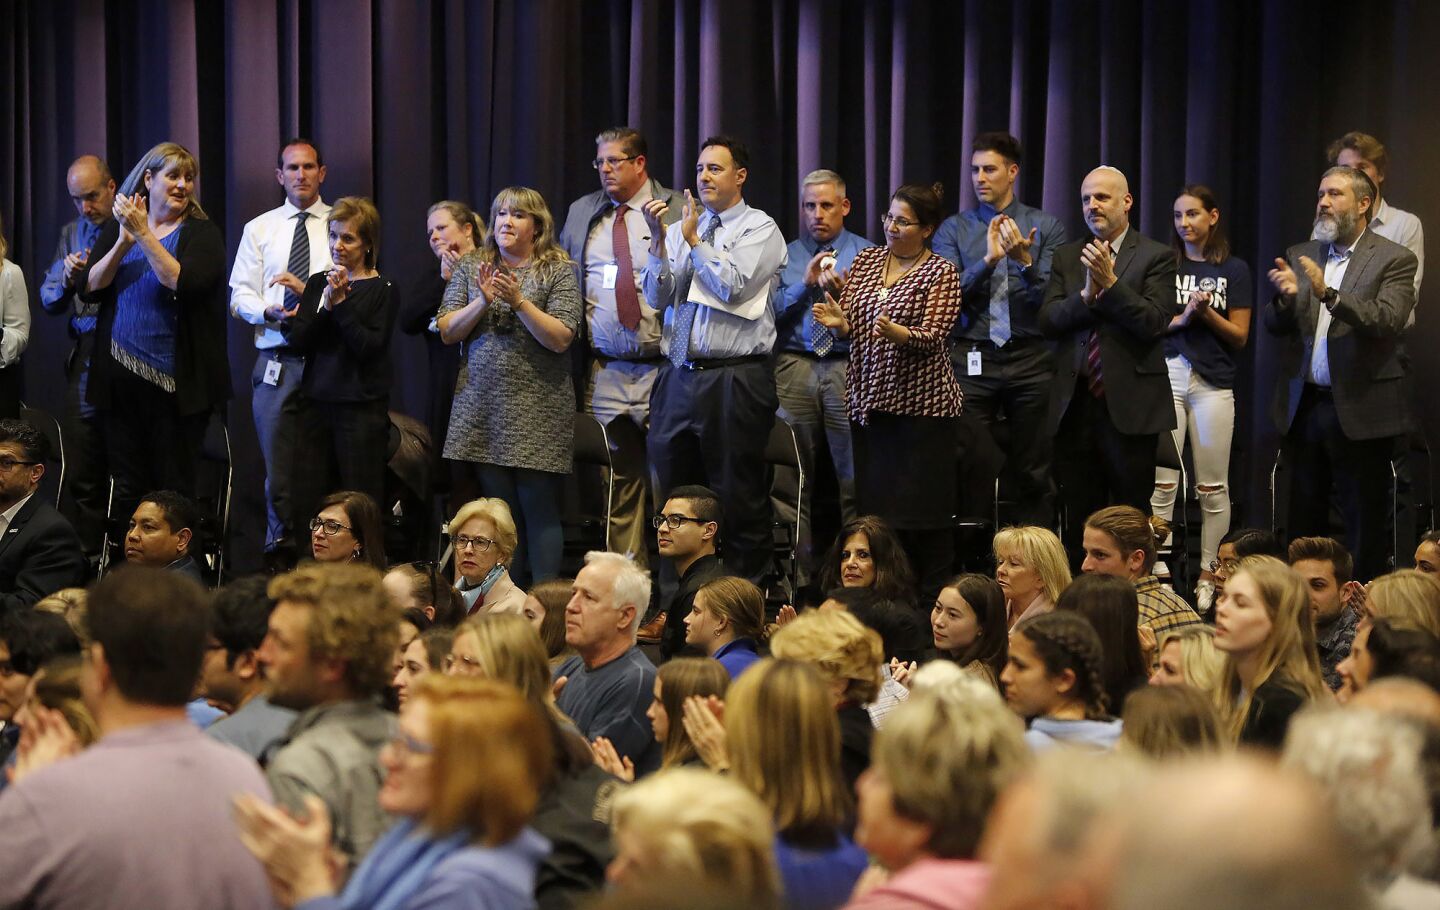 High school principals, Newport-Mesa Unified School District officials and other community members give a standing ovation to a Holocaust survivor who attended Monday night's discussion concerning pictures that emerged from a weekend party showing students saluting a swastika made of red plastic cups.